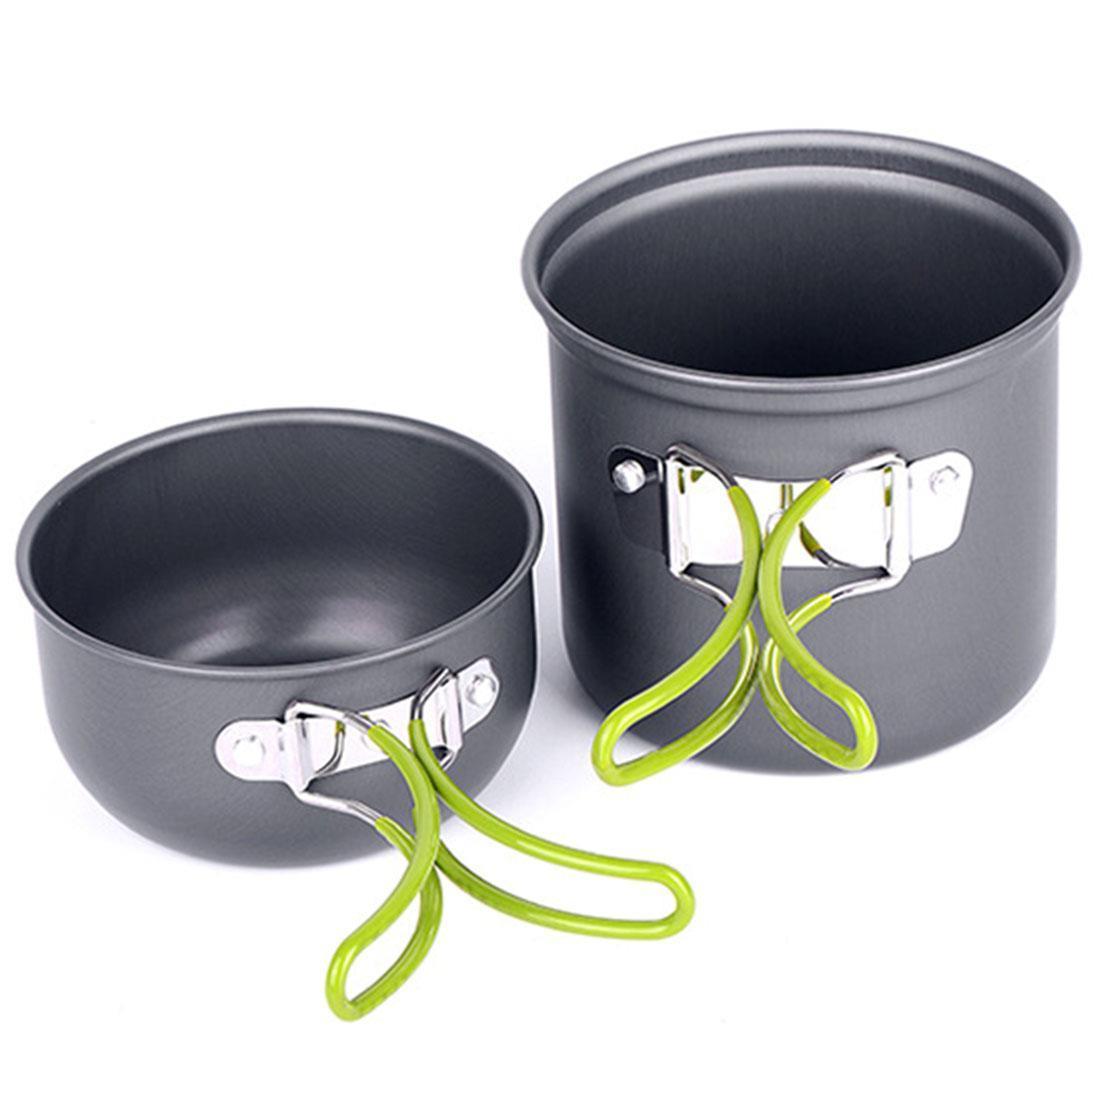 Nesting Pot & Pan for Camping With Foldable Handles -2 pieces, Camping Cookware, Pacific Rayne, Defiance Outdoor Gear Co.